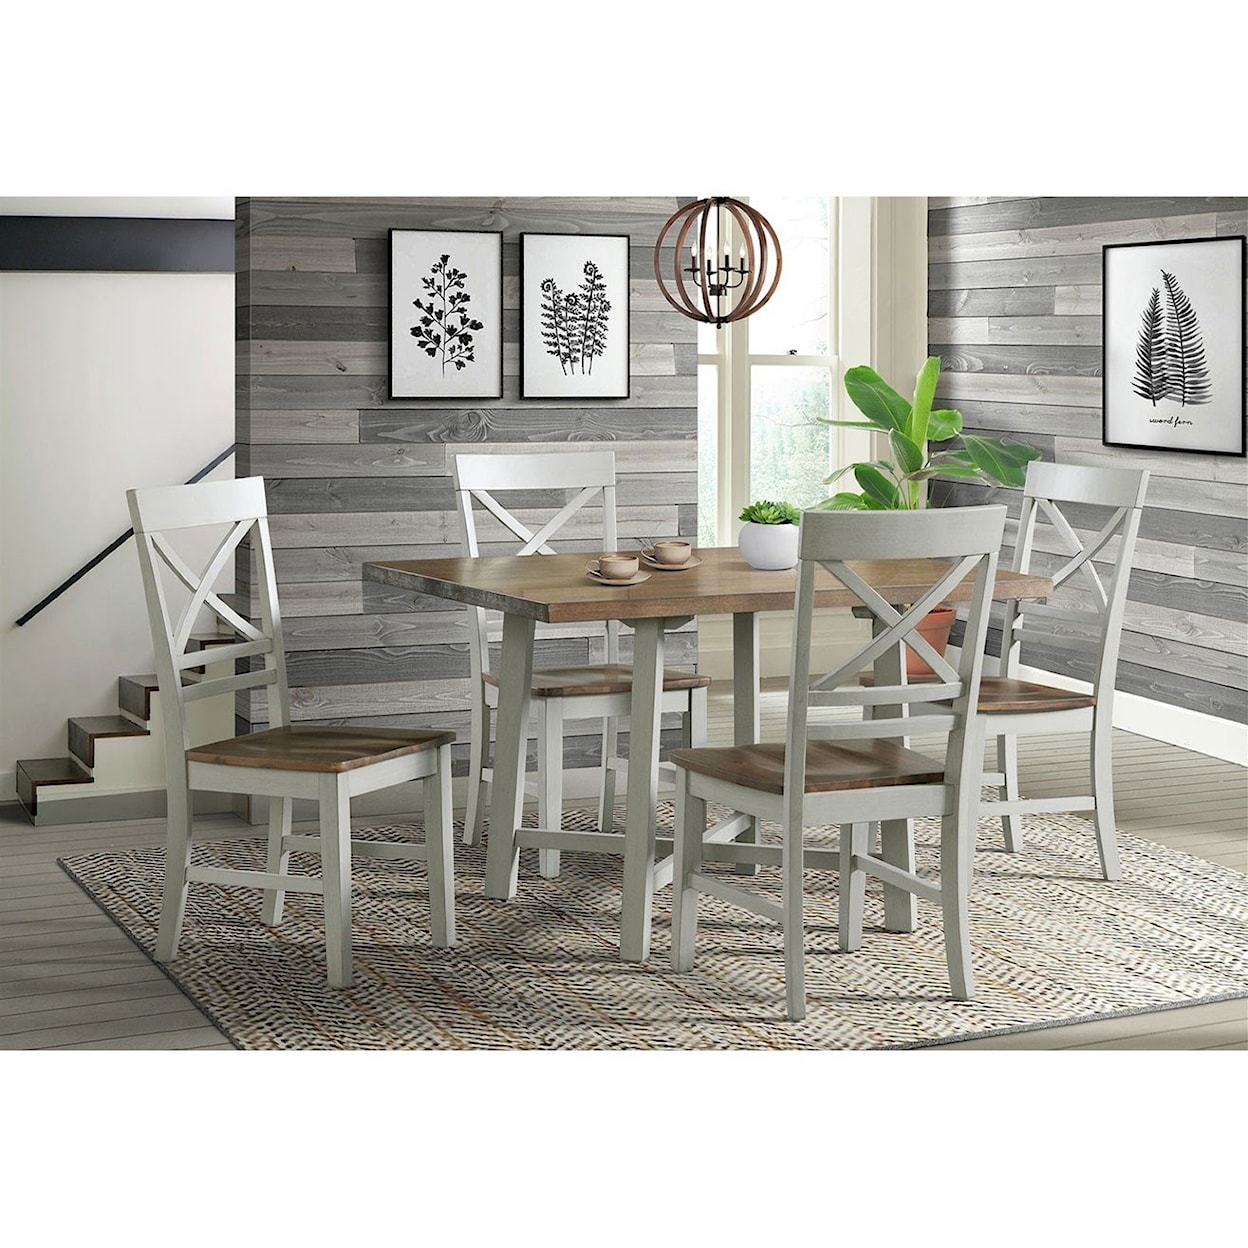 Elements El Paso 5-Piece Table and Chair Set